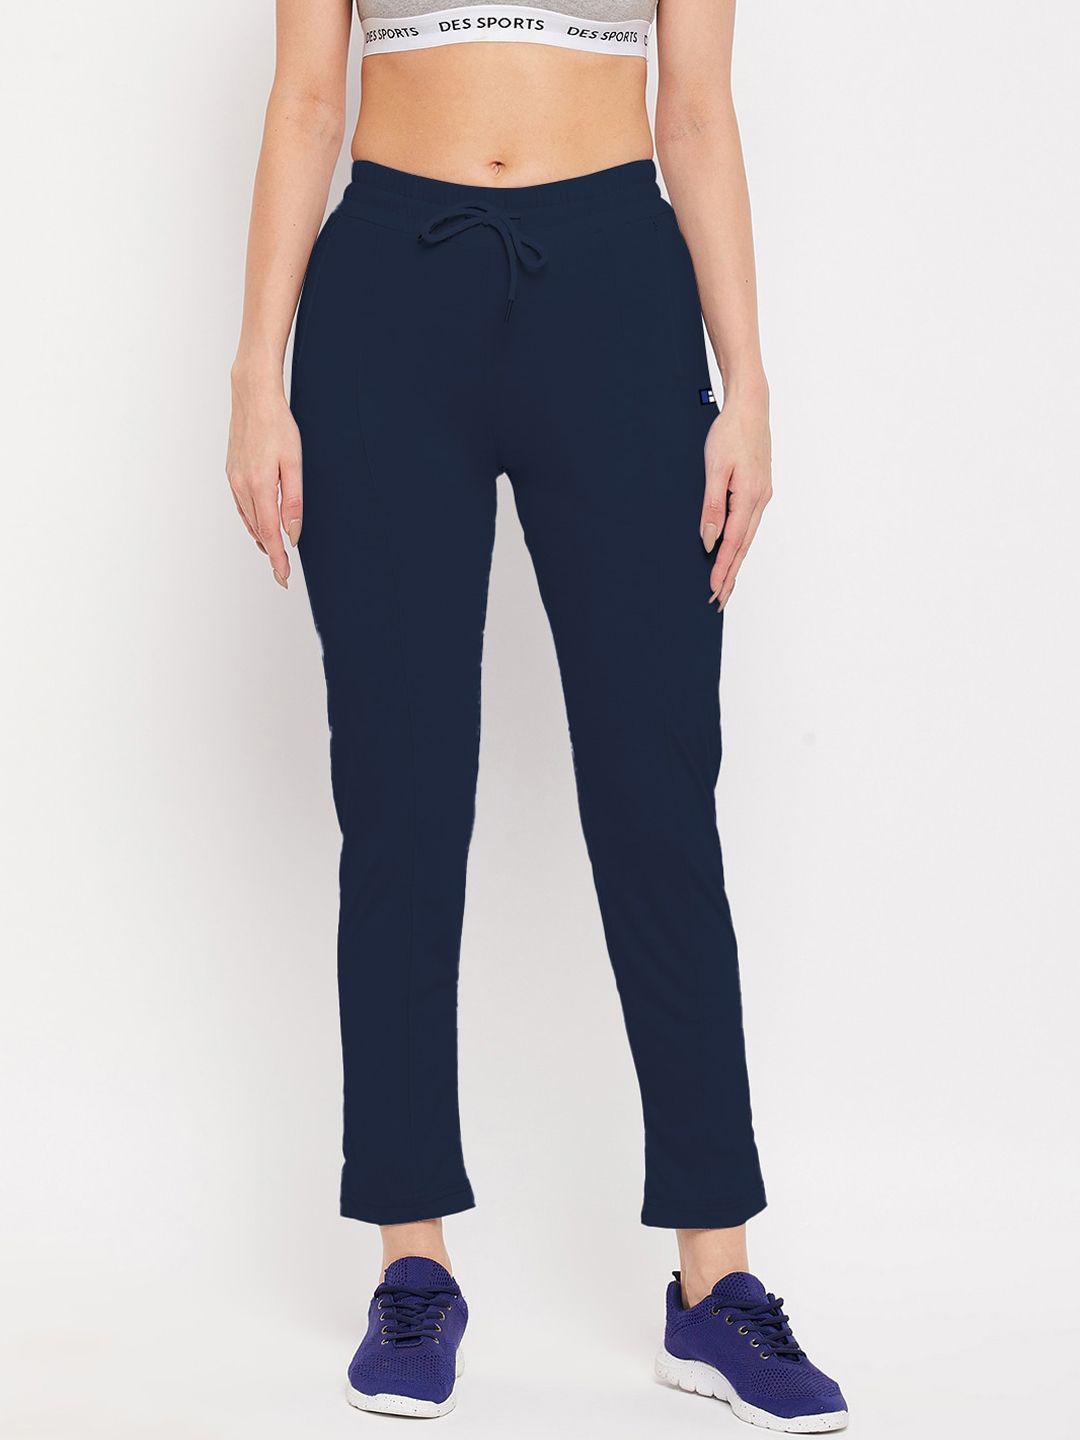 FRENCH FLEXIOUS Women Navy Blue Solid Track Pants Price in India